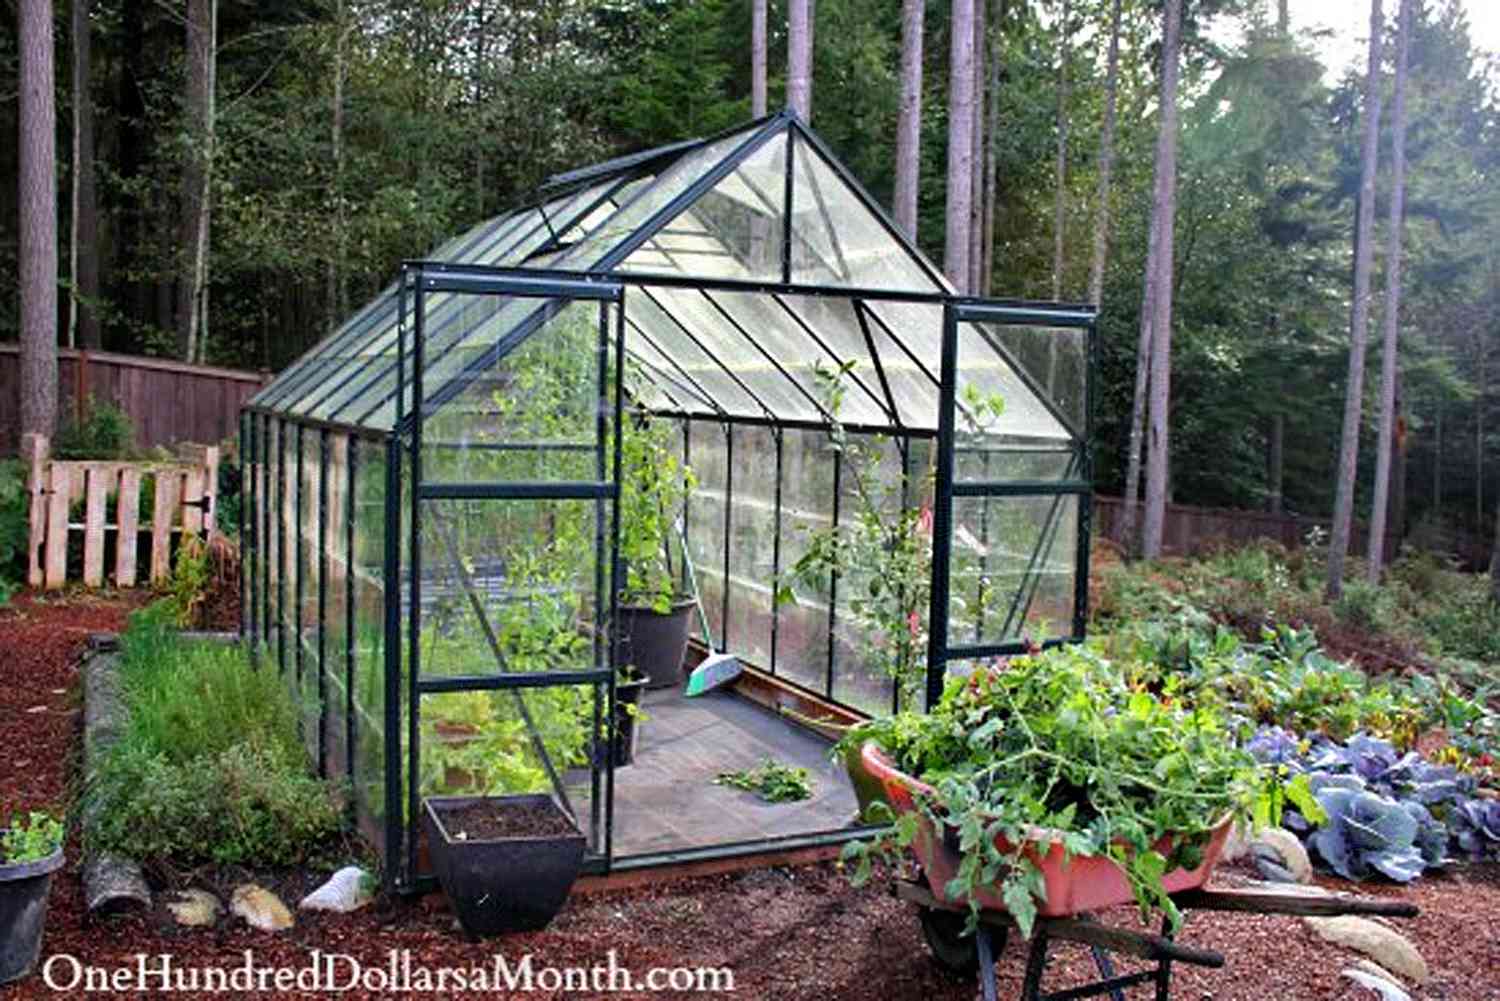 Growing Vegetables in a Greenhouse